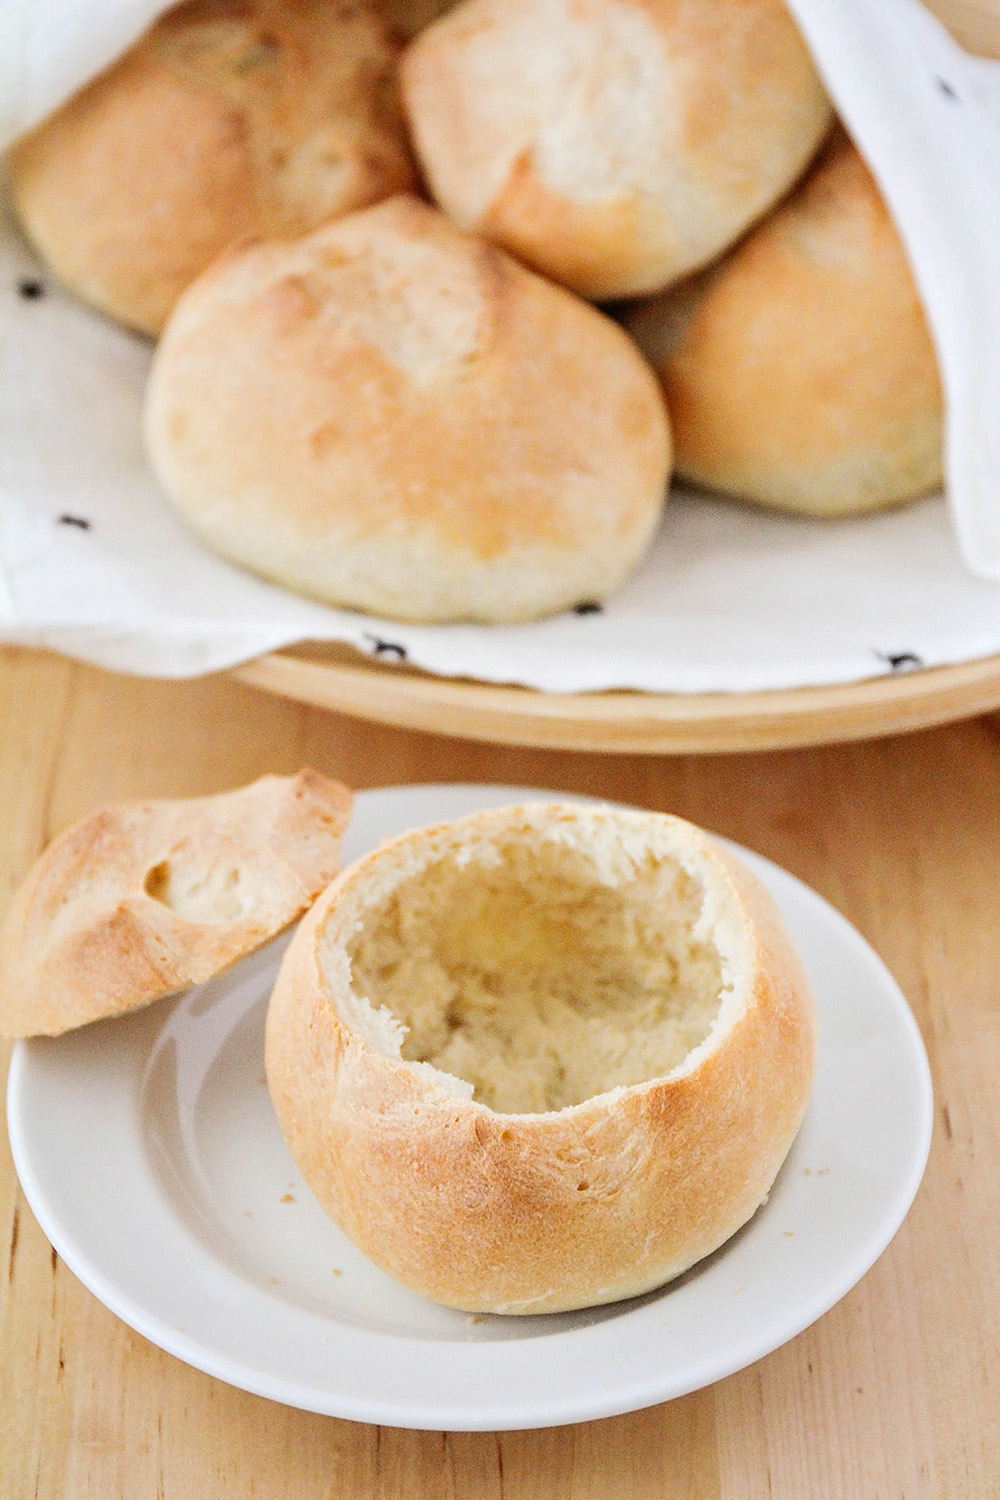 Homemade bread bowls are surprisingly easy to make, and so delicious. Perfect for soup night or for serving dips!